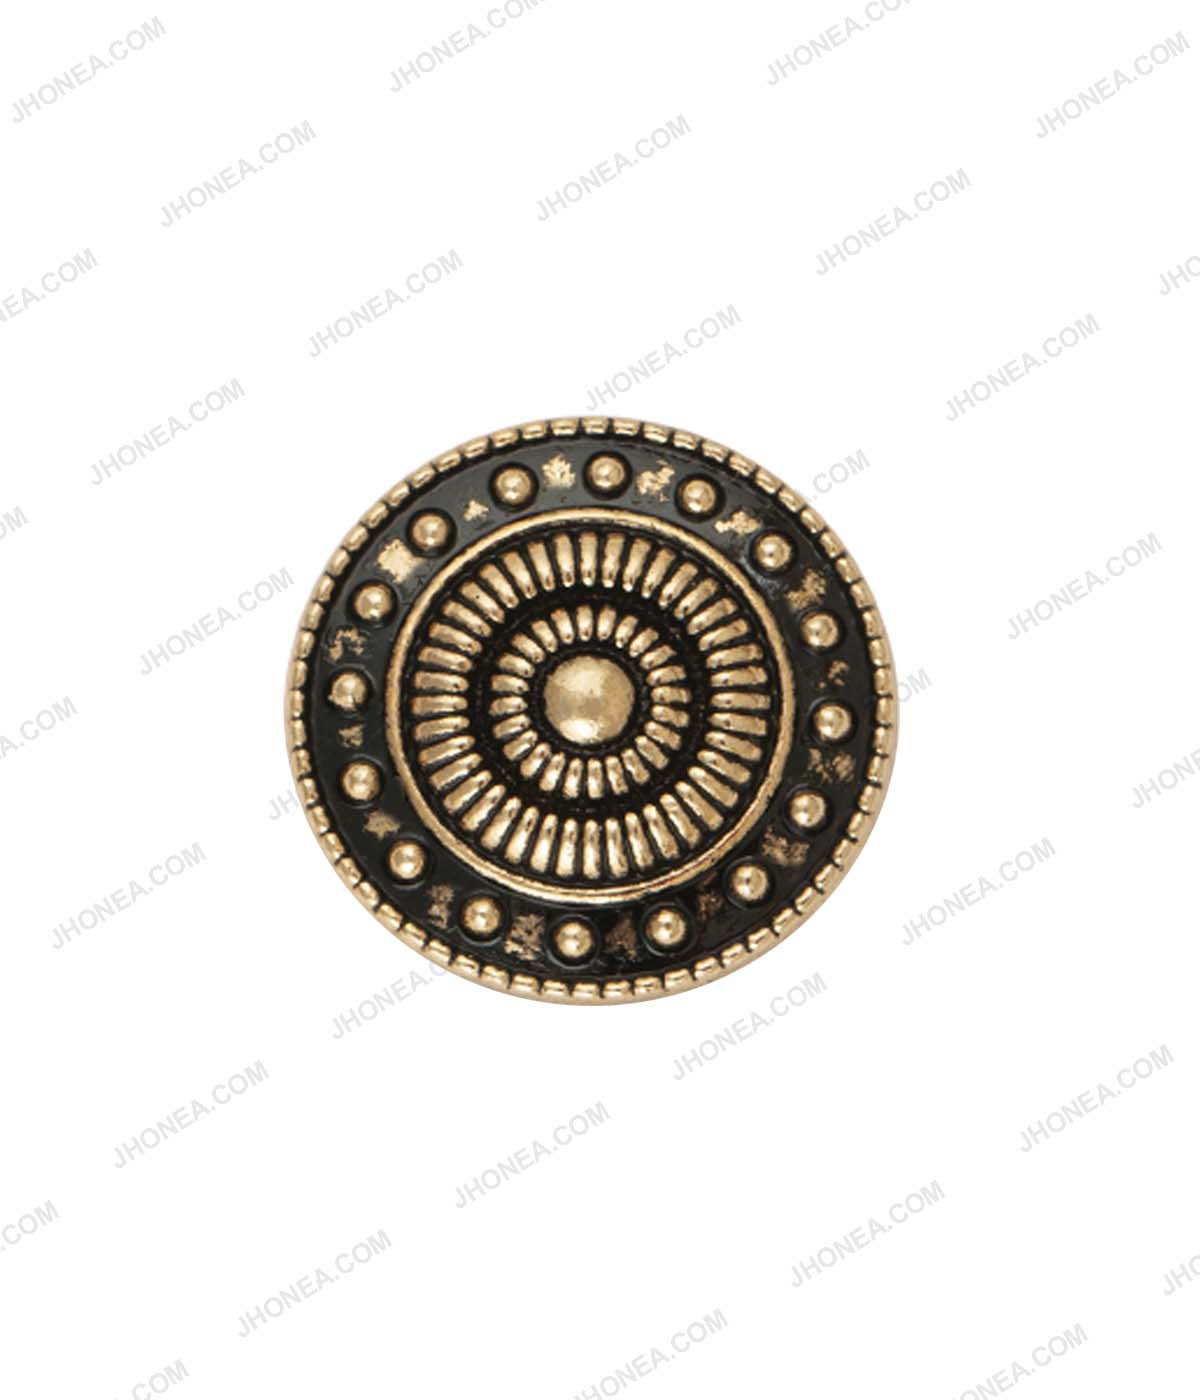 Vintage Looking Antique Gold Ethnic Buttons